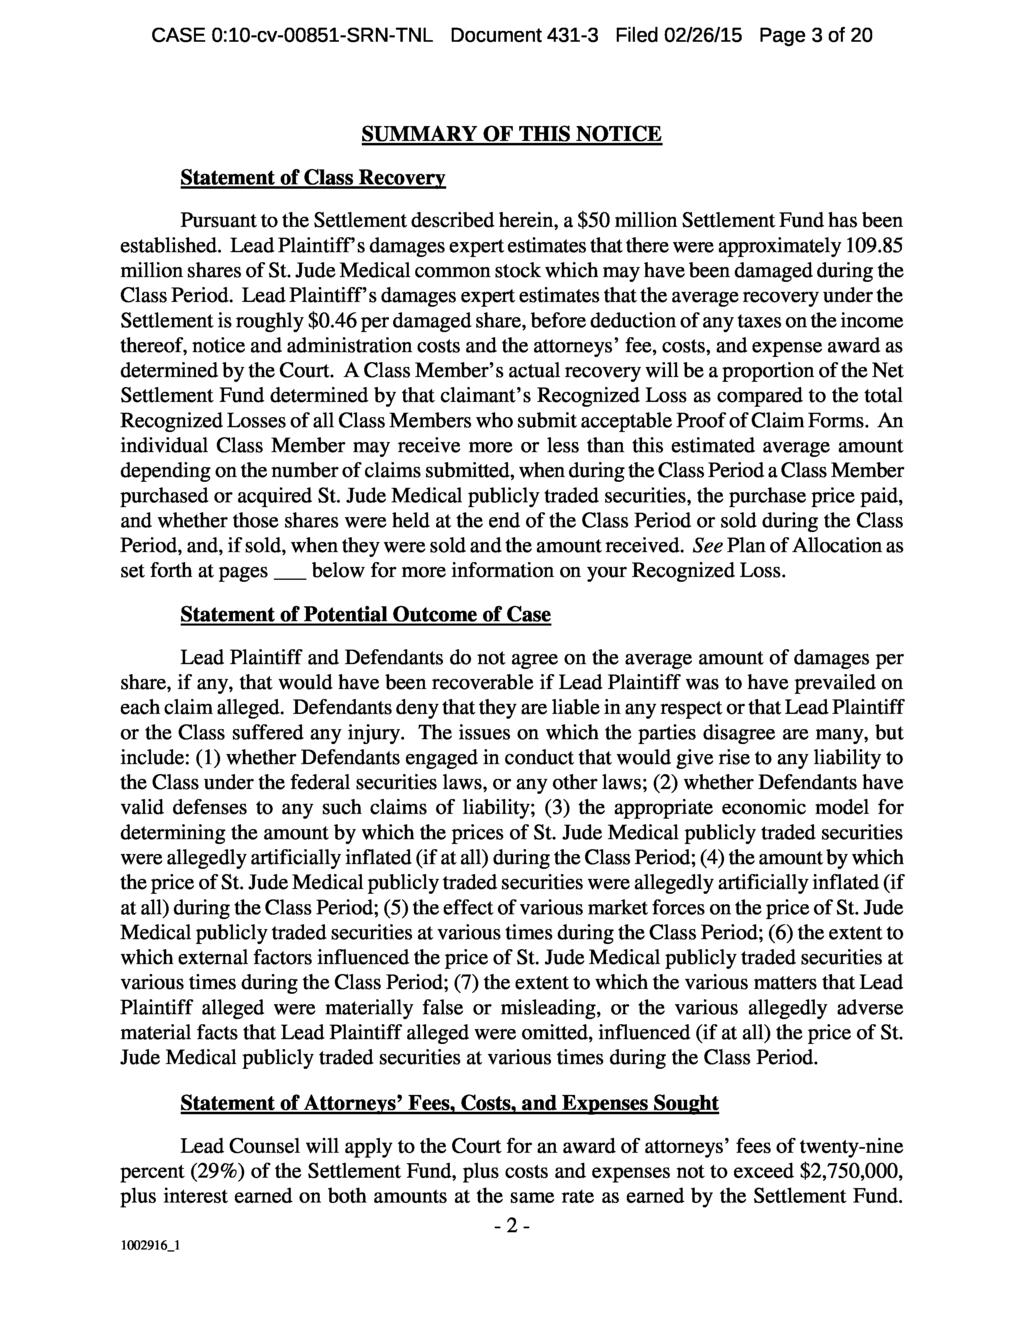 CASE 0:10-cv-00851-SRN-TNL Document 431-3 Filed 02/26/15 Page 3 of 20 Statement of Class Recovery SUMMARY OF THIS NOTICE Pursuant to the Settlement described herein, a $50 million Settlement Fund has